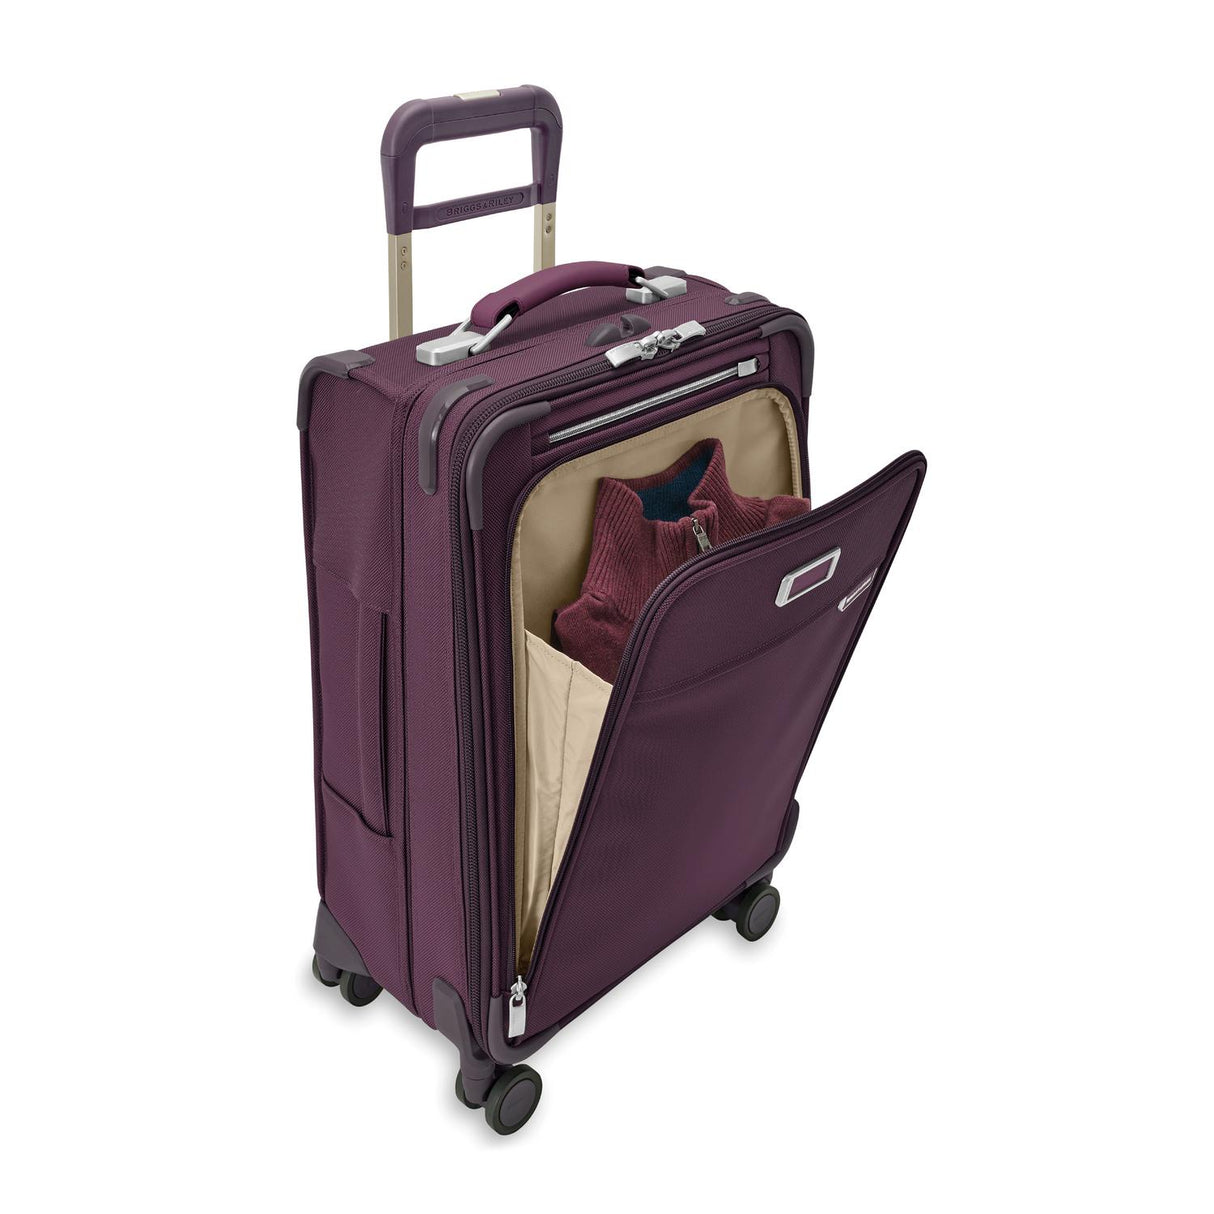 Briggs & Riley Baseline Essential 22" Carry-On Expandable Spinner , , BLU122CXSP-64fp2_1_22141834-a912-4fae-b4c8-28ef62f3372b